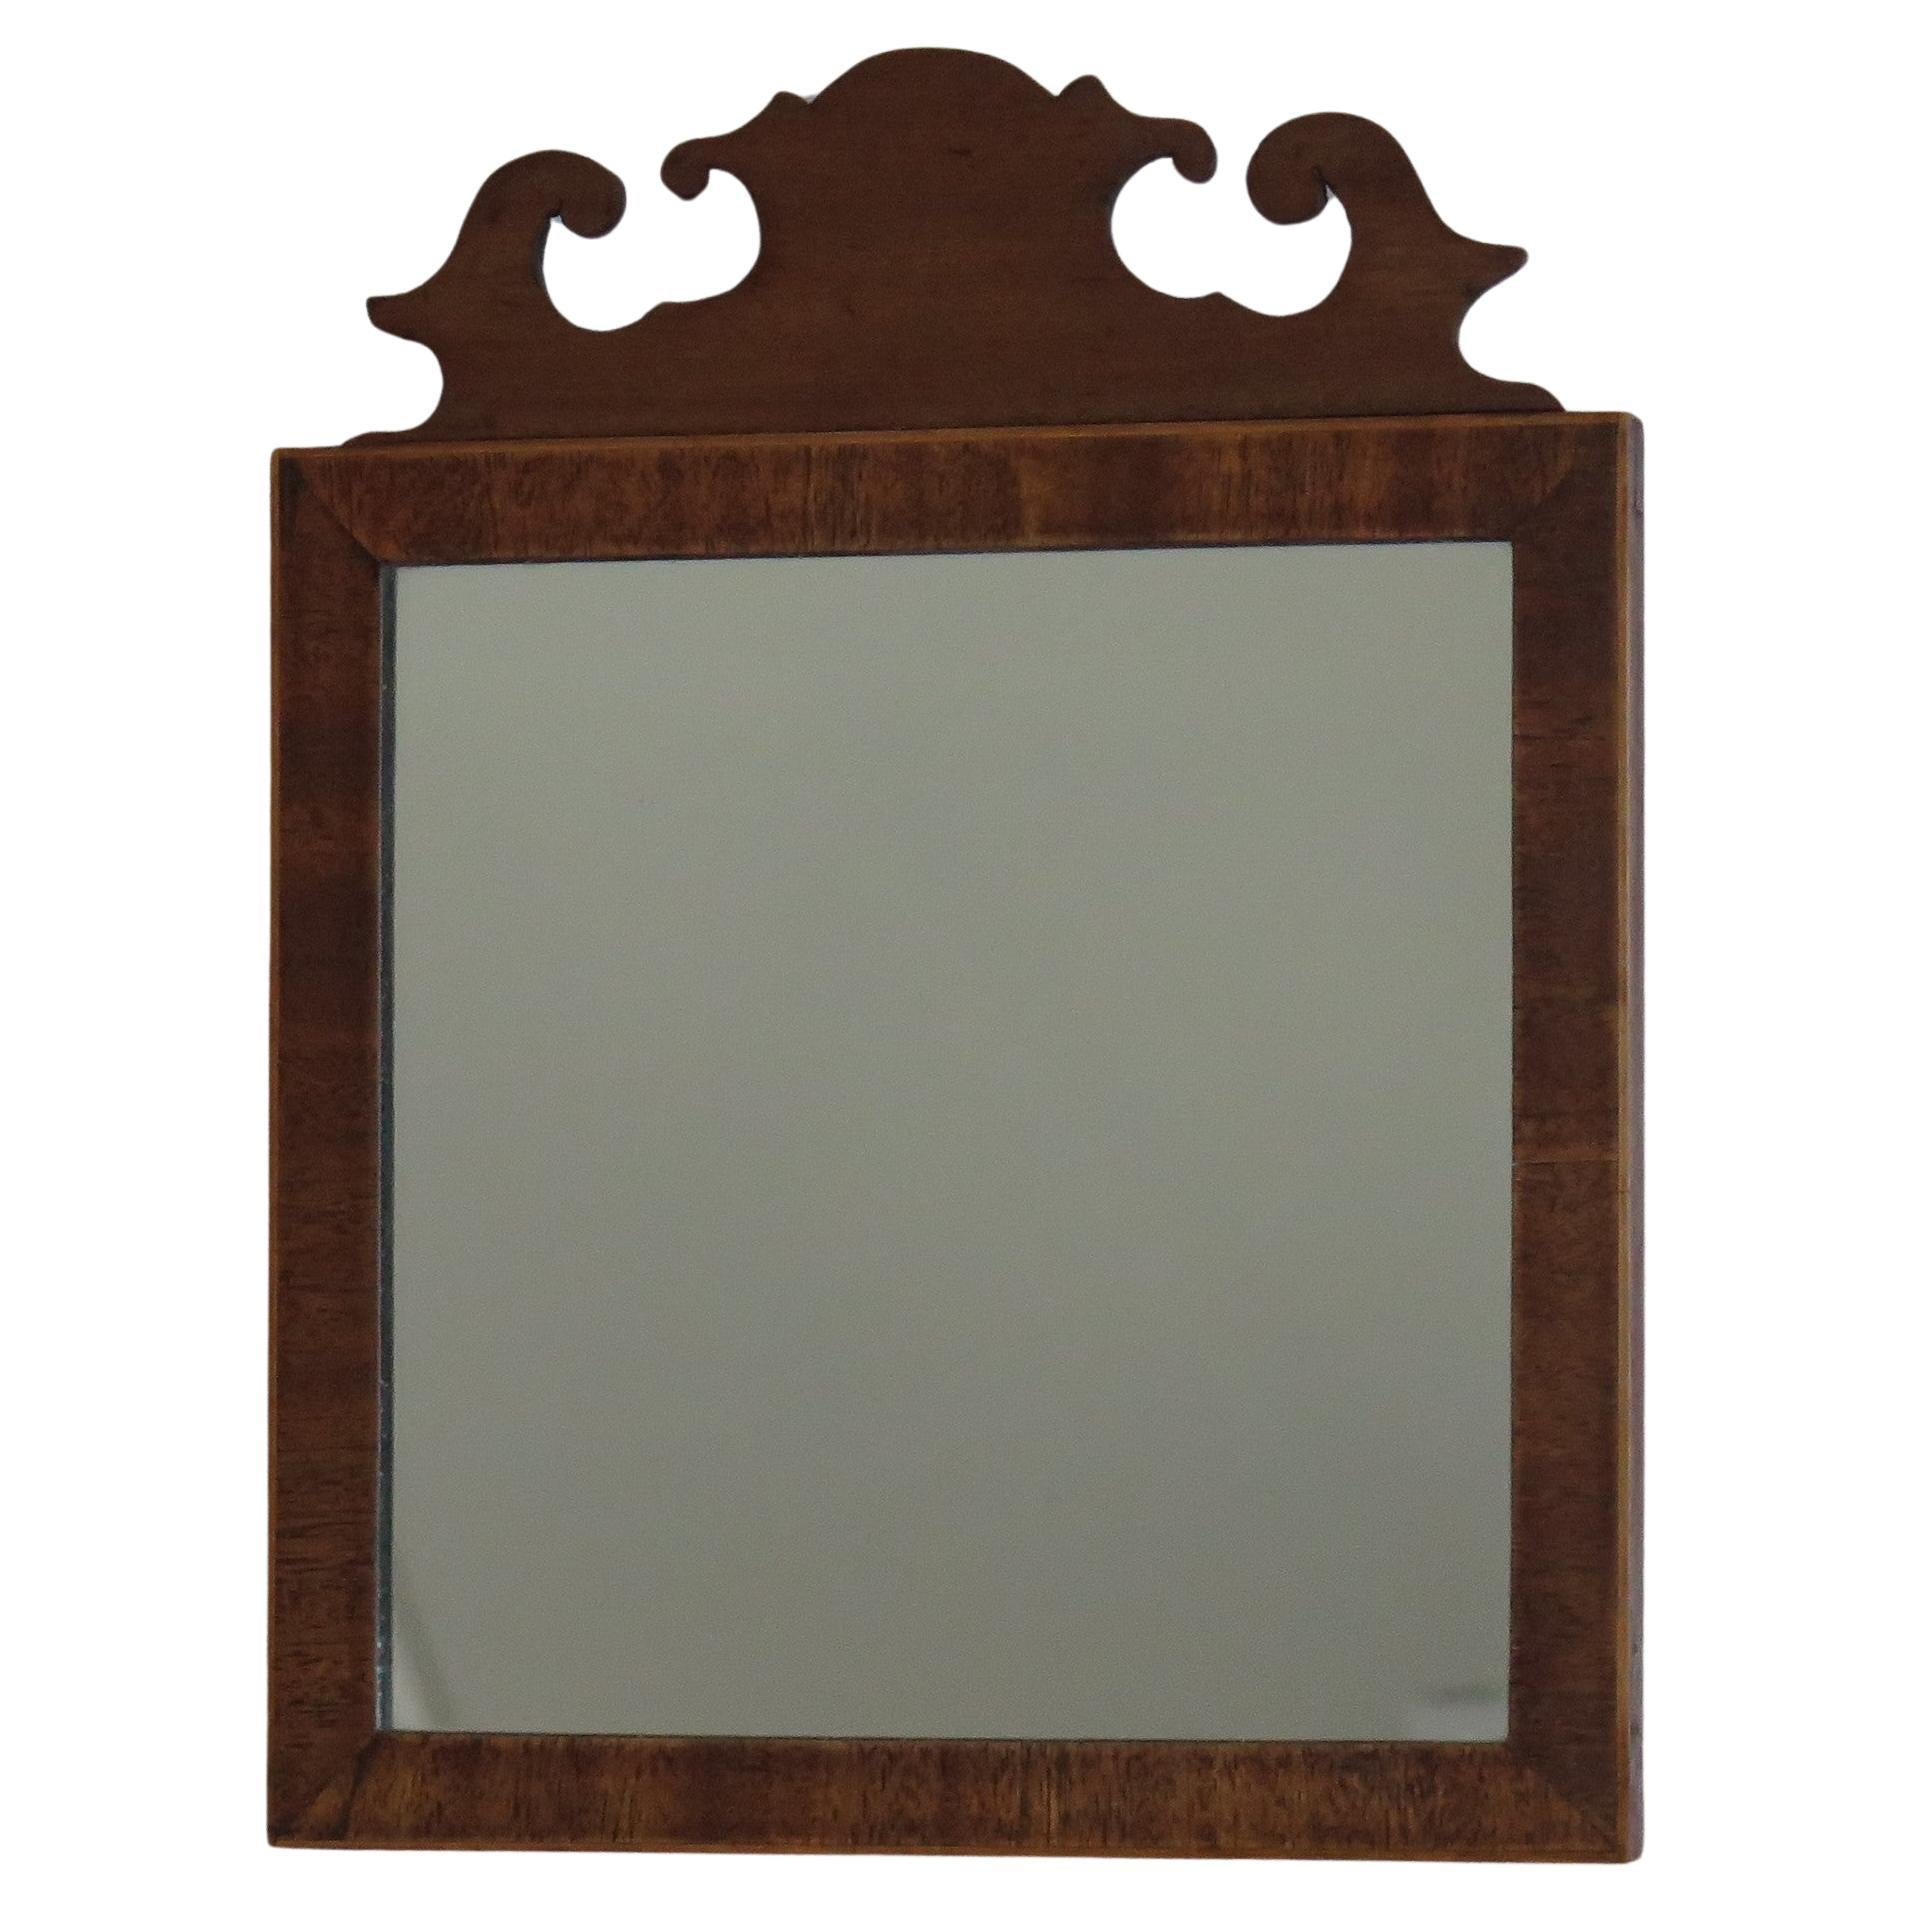 This is a fine quality English Wall Mirror of small proportions, dating to the second half of the 18th century, George 111rd period, circa 1770.

The mirror is well constructed with a hardwood veneered frame, veneered on pine. This mirror has many